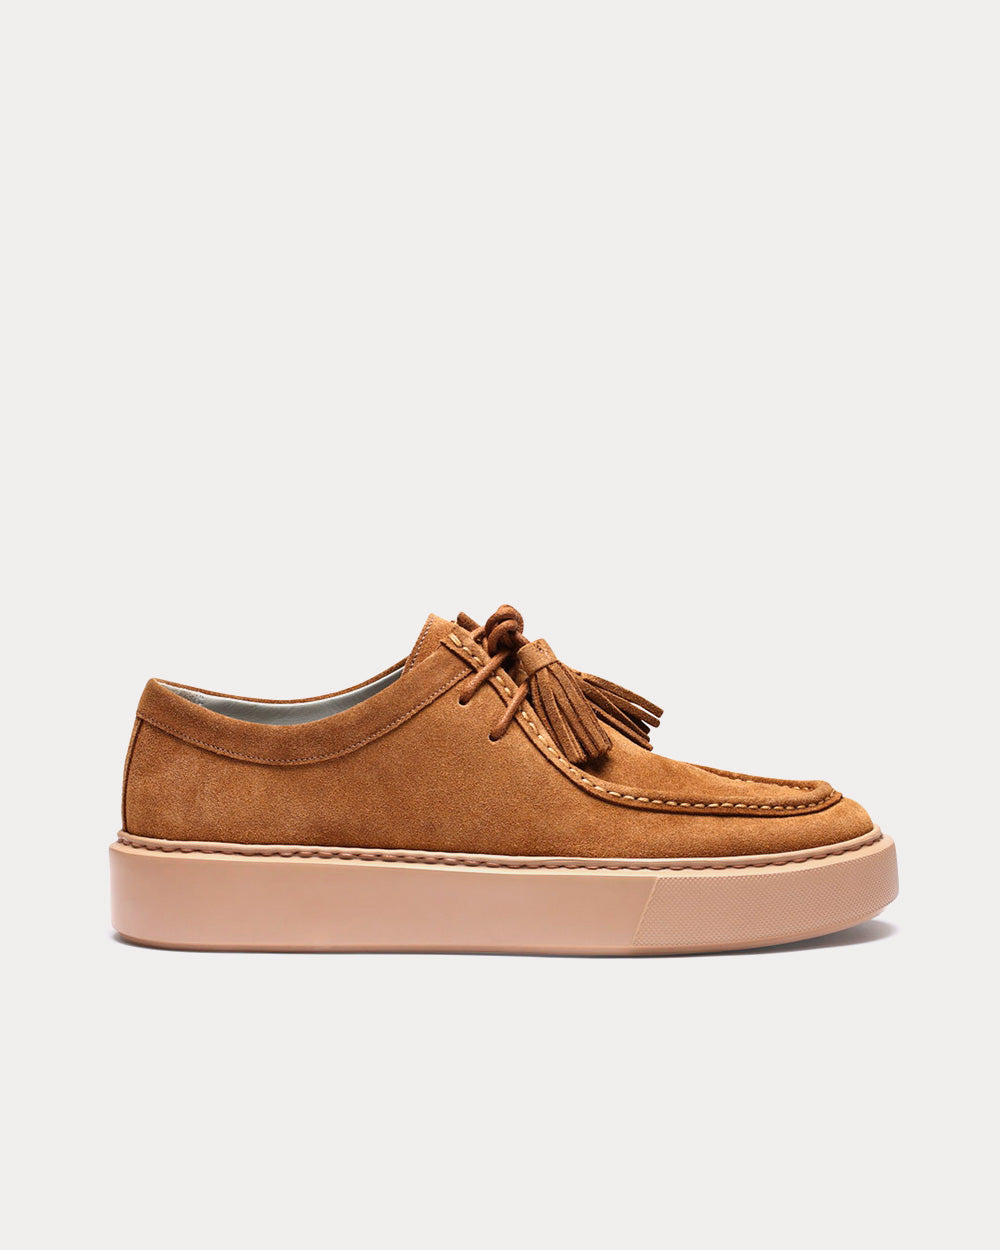 Grenson - Sneaker 41 Burnished Suede Snuff Low Top Sneakers